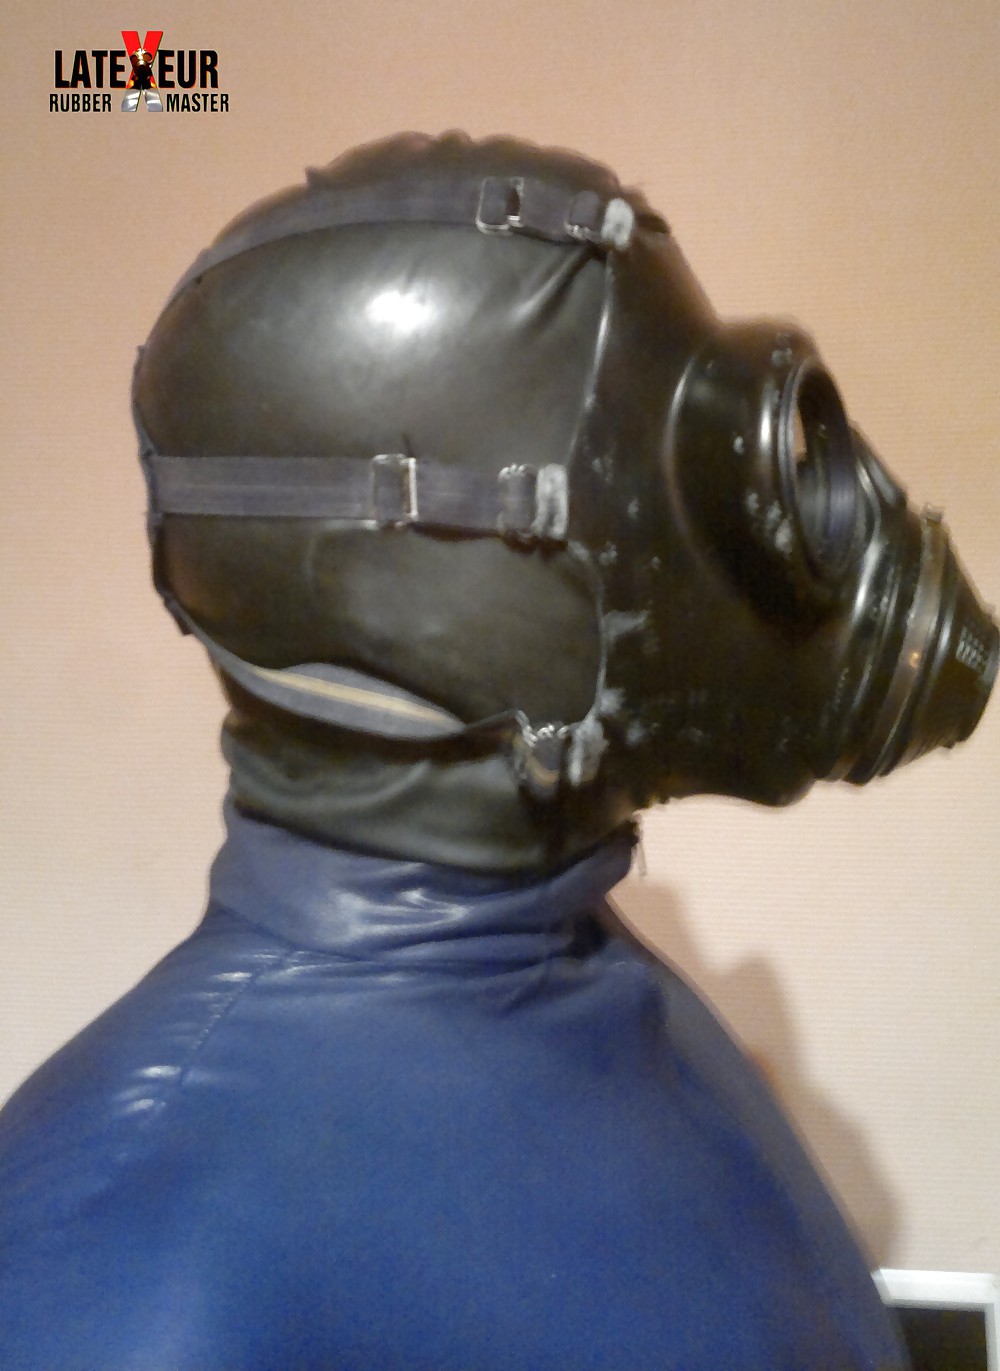 Porn Pics French Rubber Master Latexeur